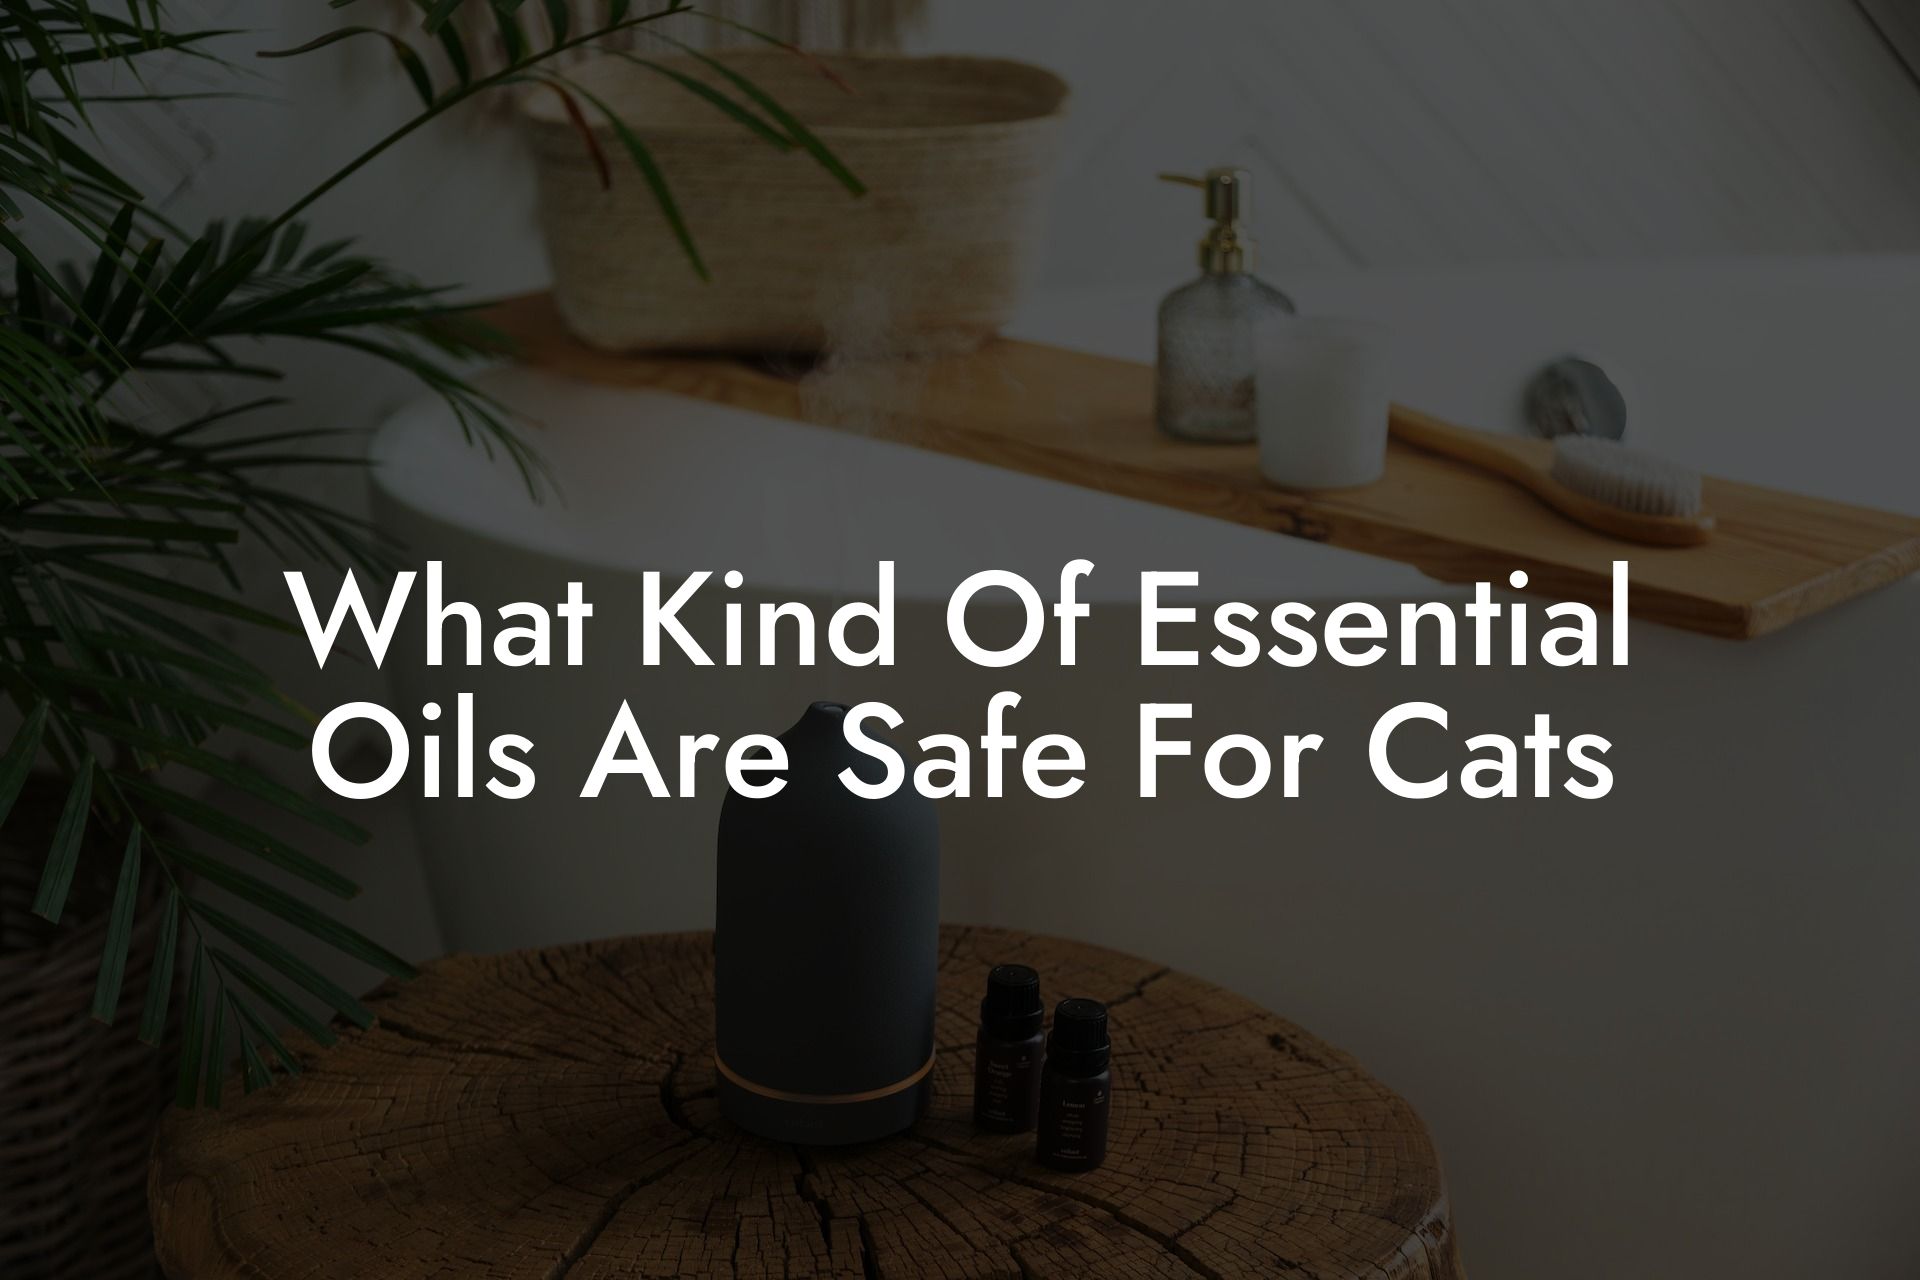 What Kind Of Essential Oils Are Safe For Cats